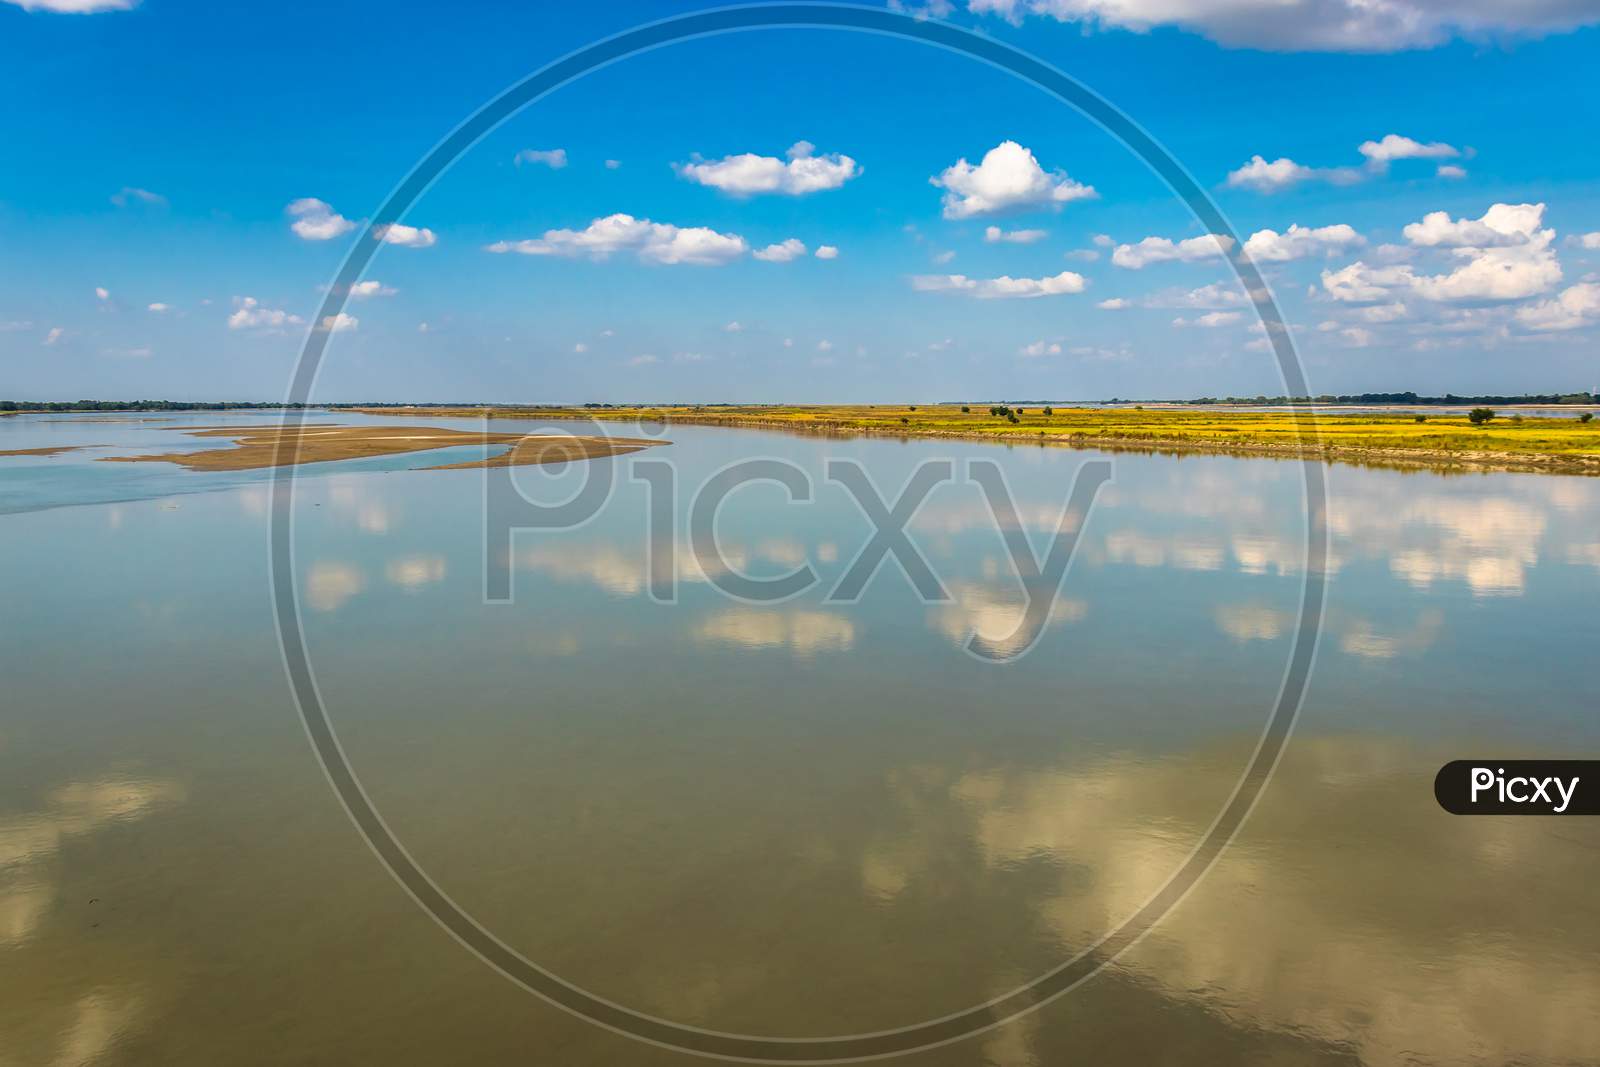 Clear Blue Sky With Many Small Cloud Patch And River Water Reflection